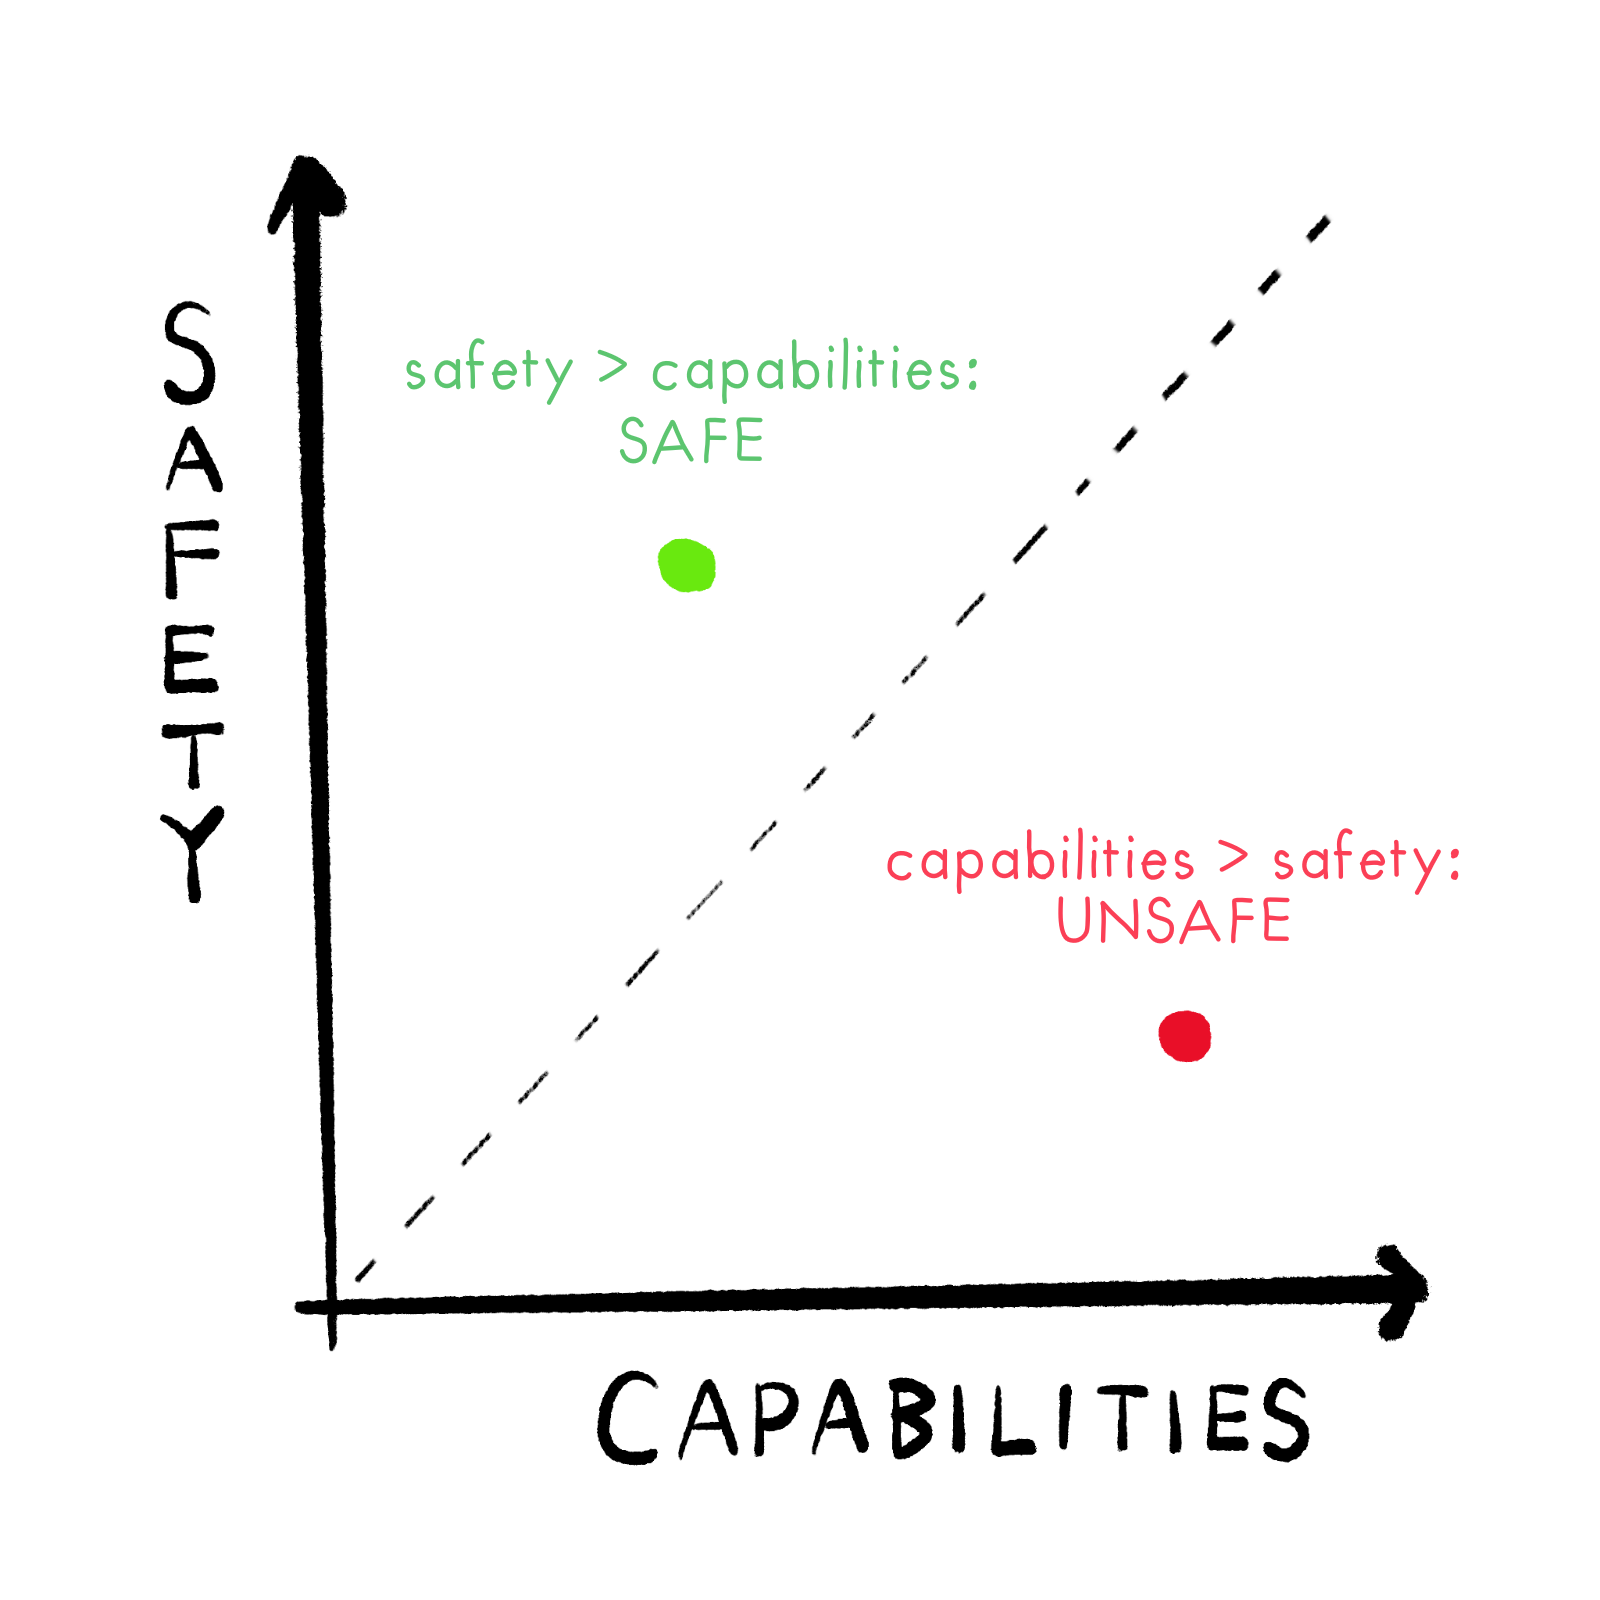 Graph of Safety vs Capabilities. When safety > capabilities, it's safe. When capabilities < safety, it's unsafe.